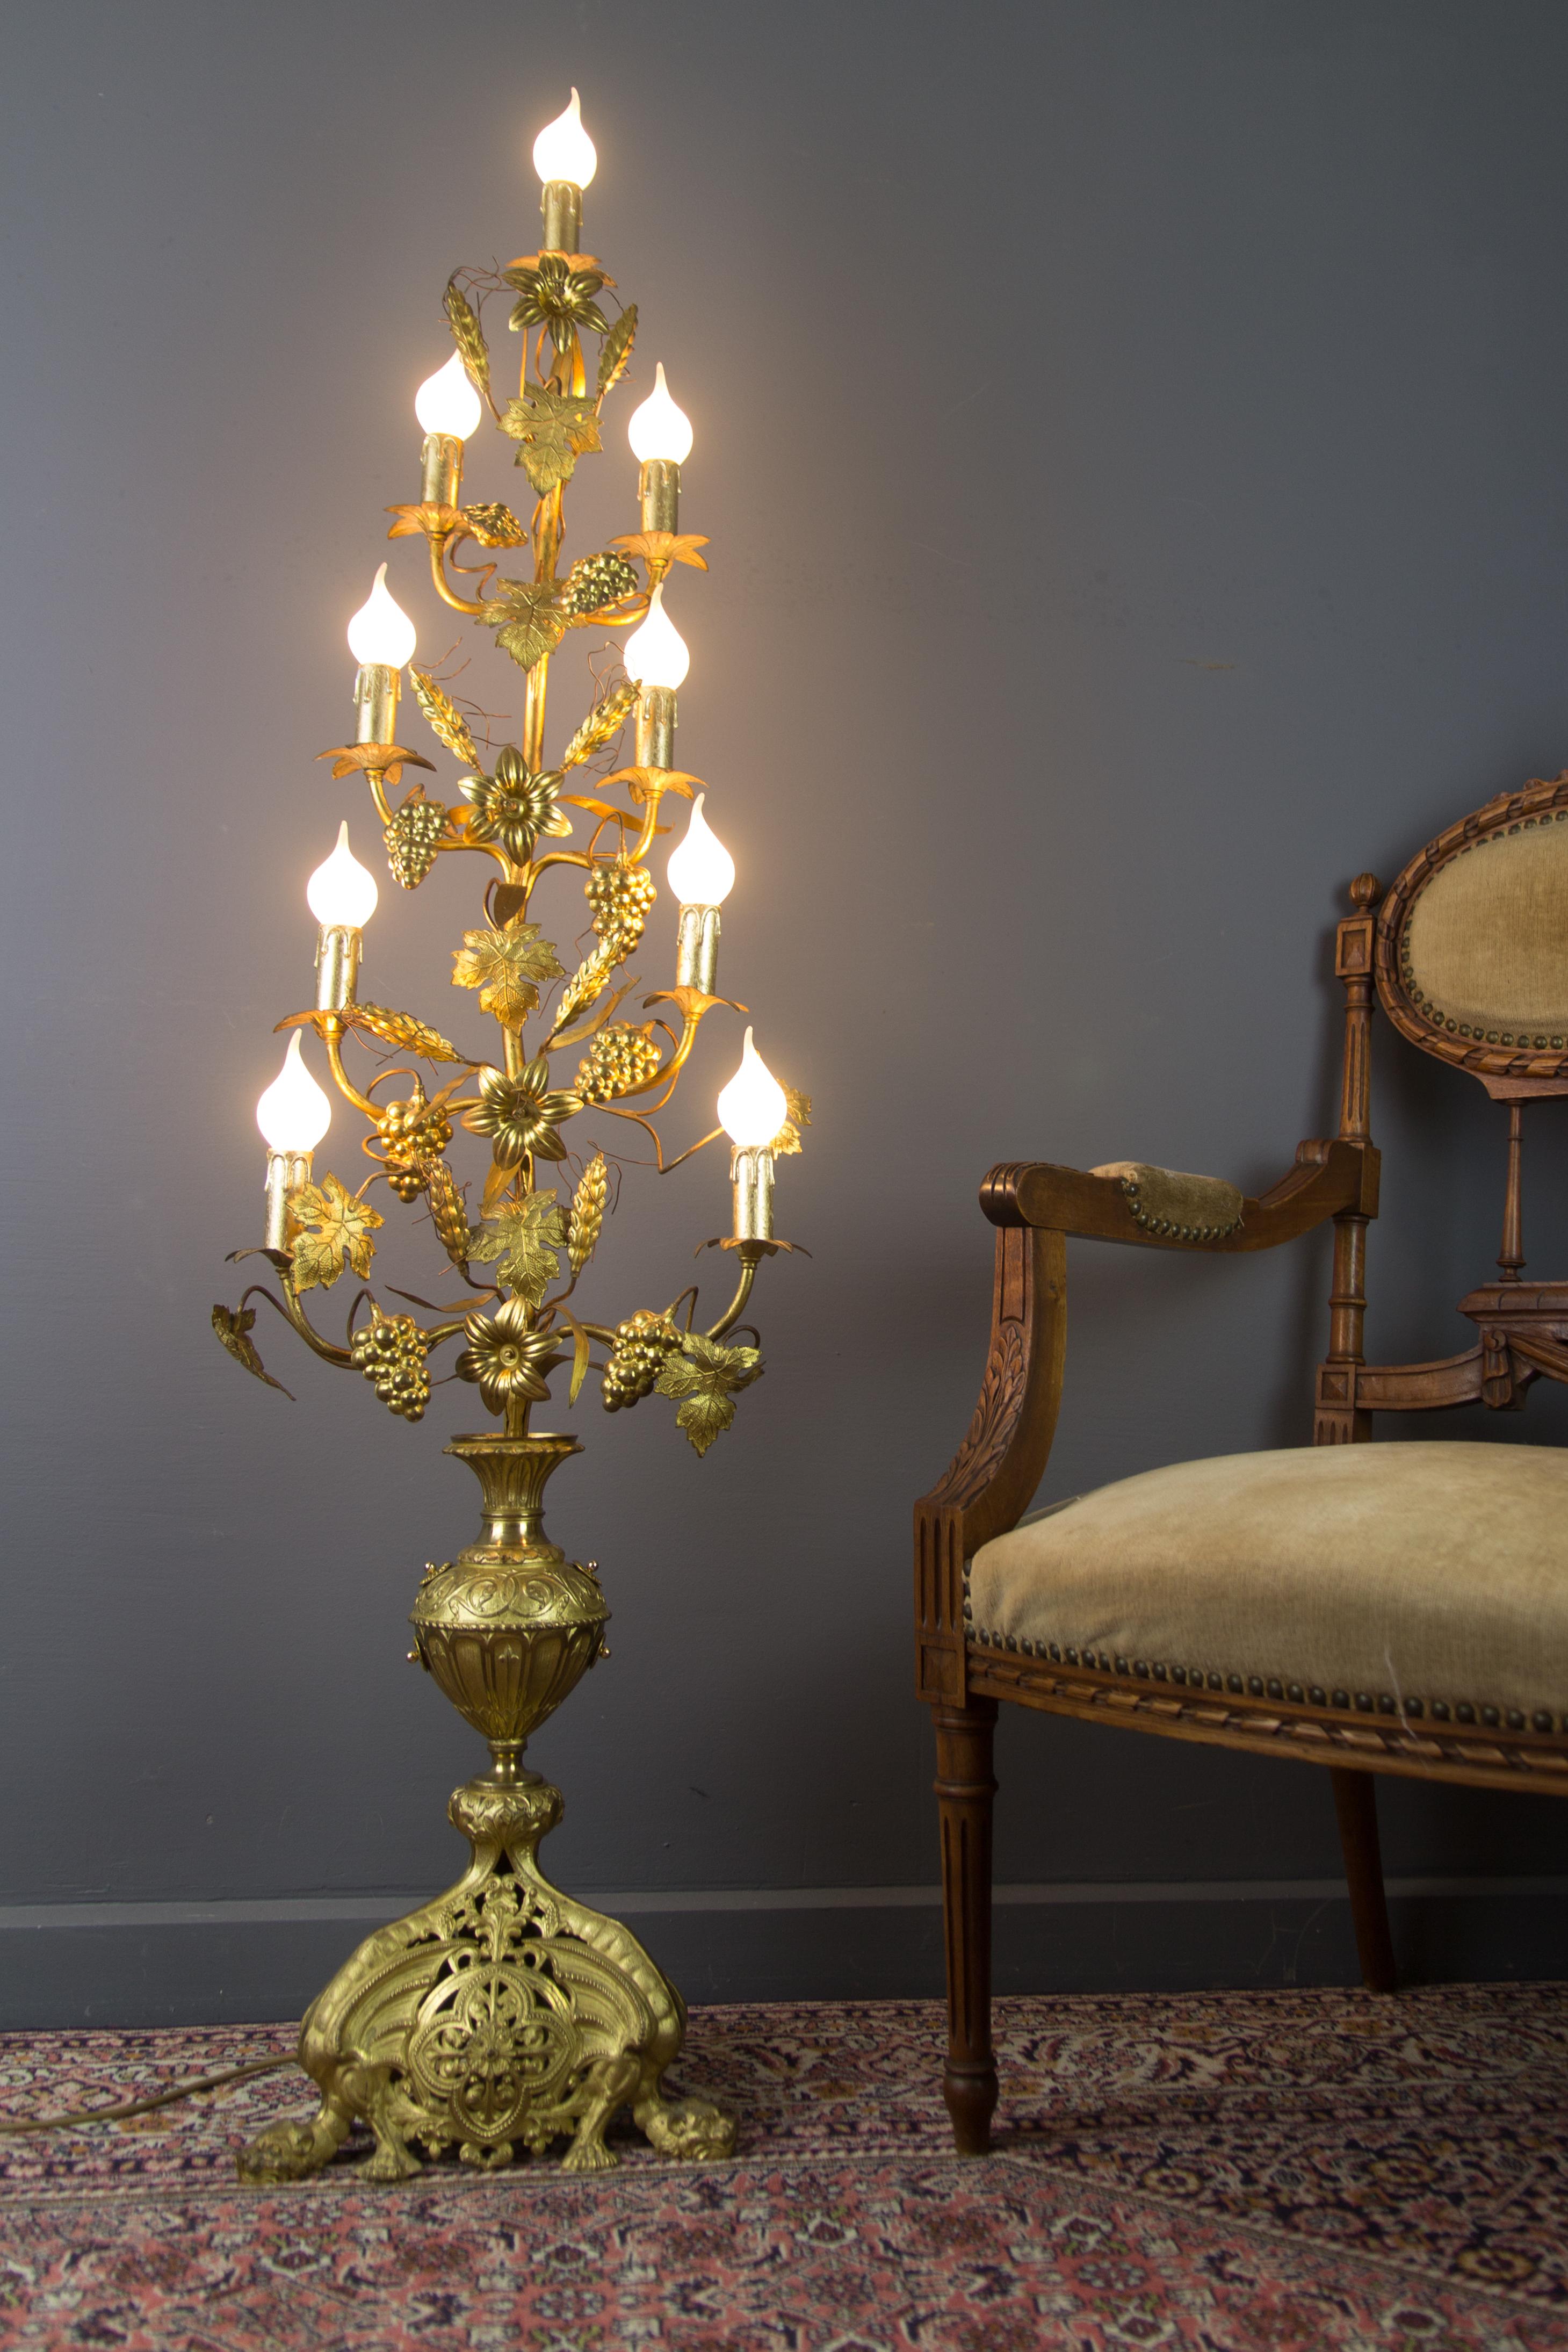 Large and beautiful electrified candelabra to floor lamp, made of gilt bronze and brass, decorated with brass lily flowers and leaves, ears of wheat, vines, and vine leaves. Impressive and ornate bronze base. Nine arms, each with a socket for an